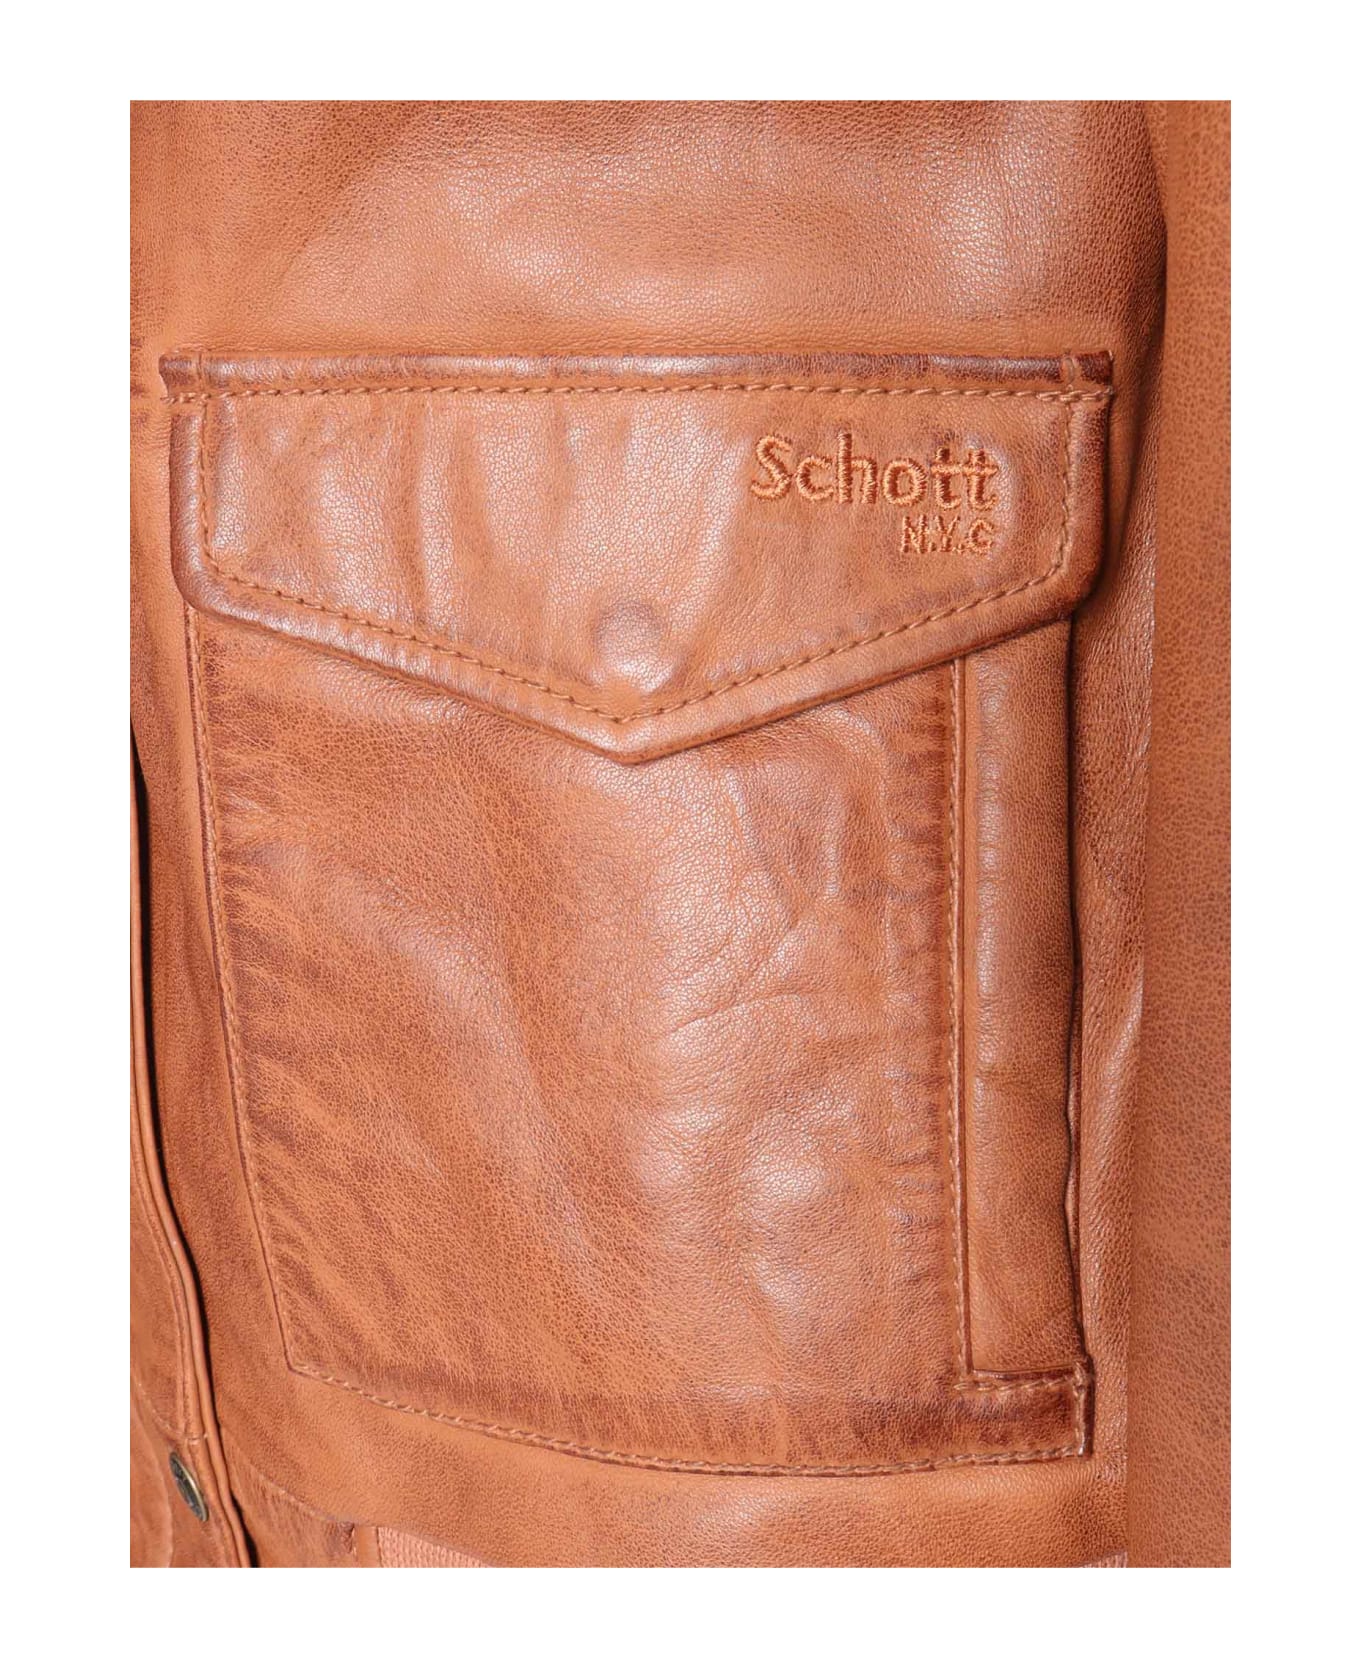 Schott NYC Camel Colored Leather Jacket - BROWN